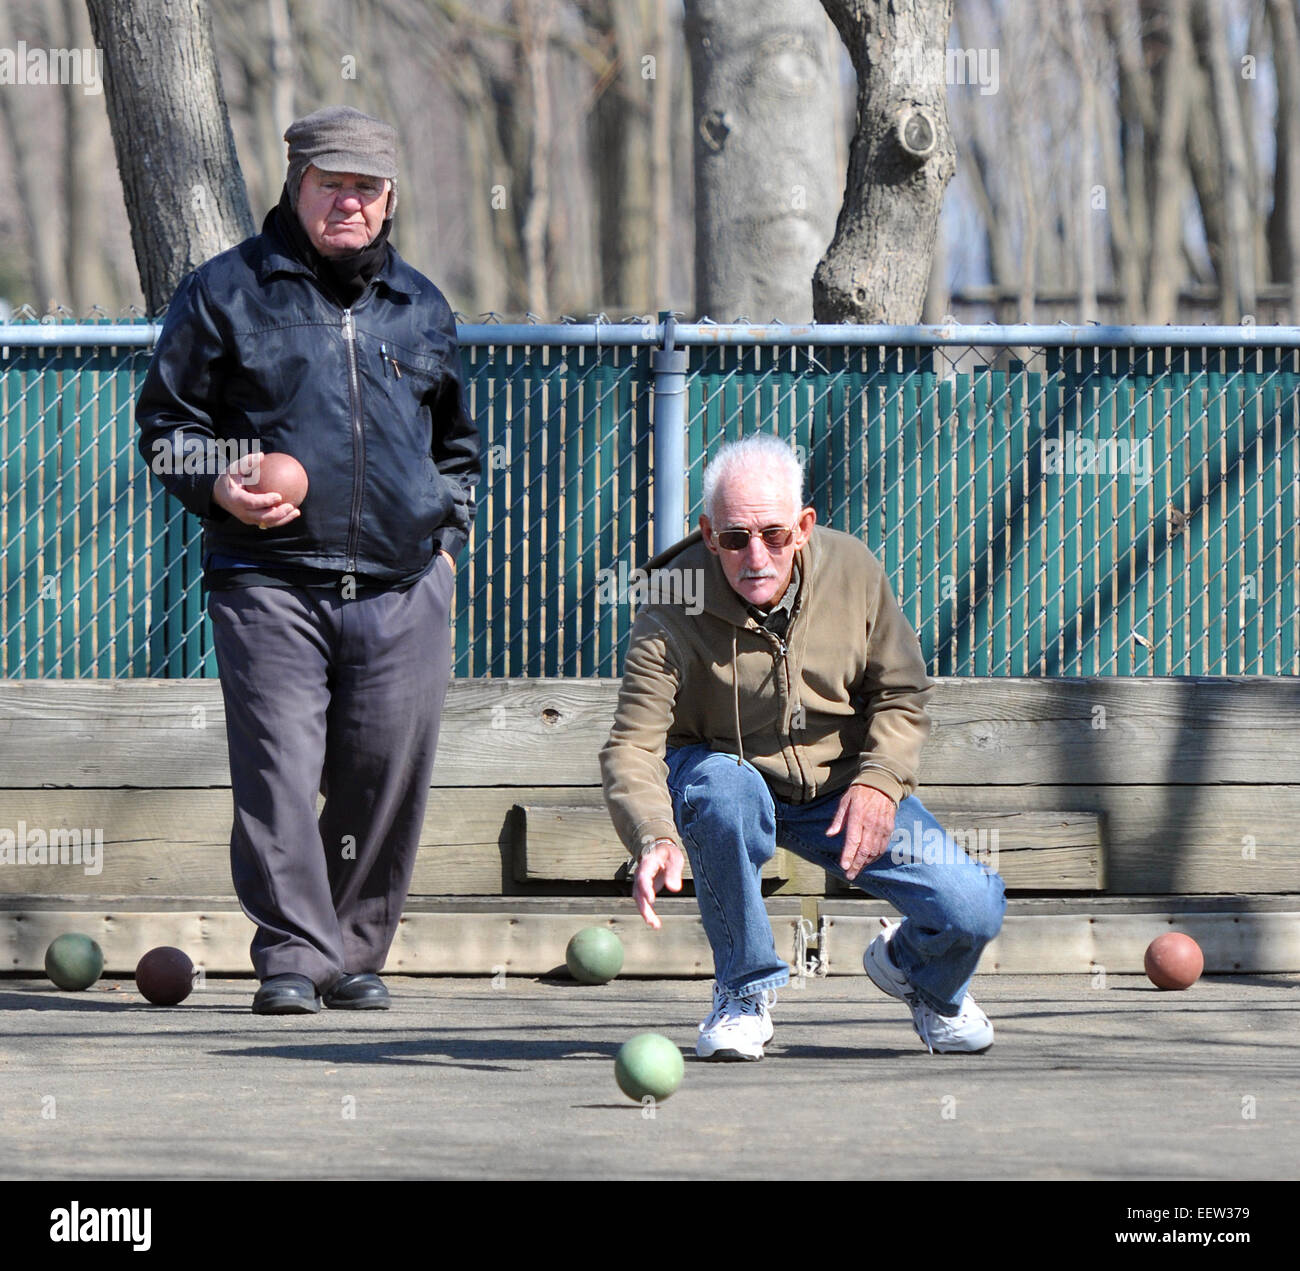 West Haven CT USA- Ralph Manzo of West Haven rolls during a game of Bocci, as Matteo Diurno of New Haven looks on at the West Haven boardwalk courts. The two were enjoying today's weather and looking forward to Thursday, where temps are projected to be in the mid-60s'. Stock Photo